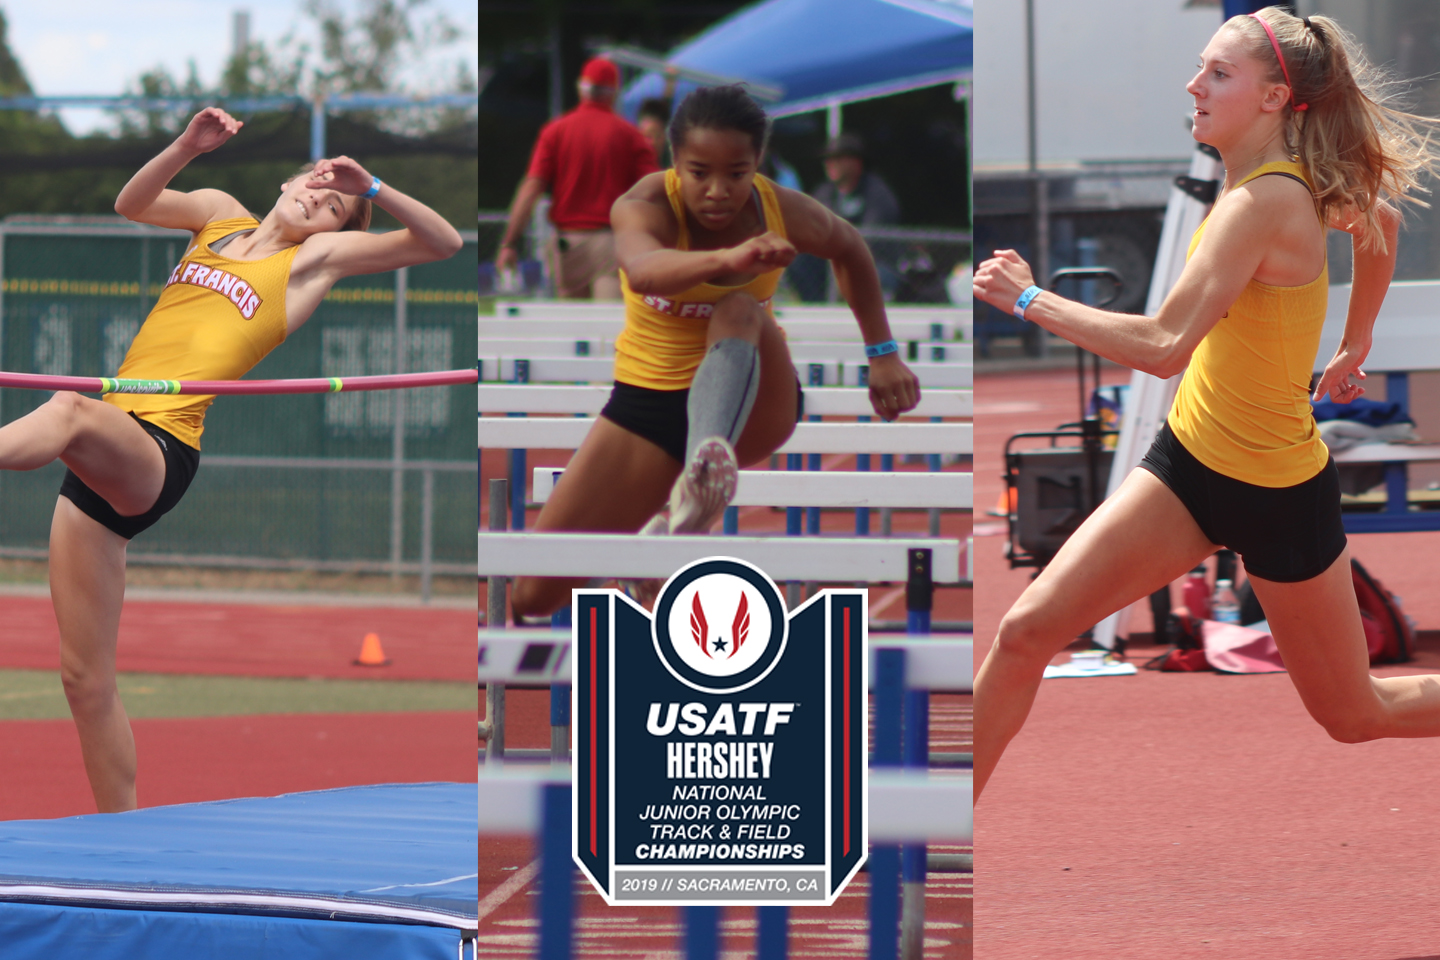 Three Troubies Competing at USATF Junior Olympic Championships